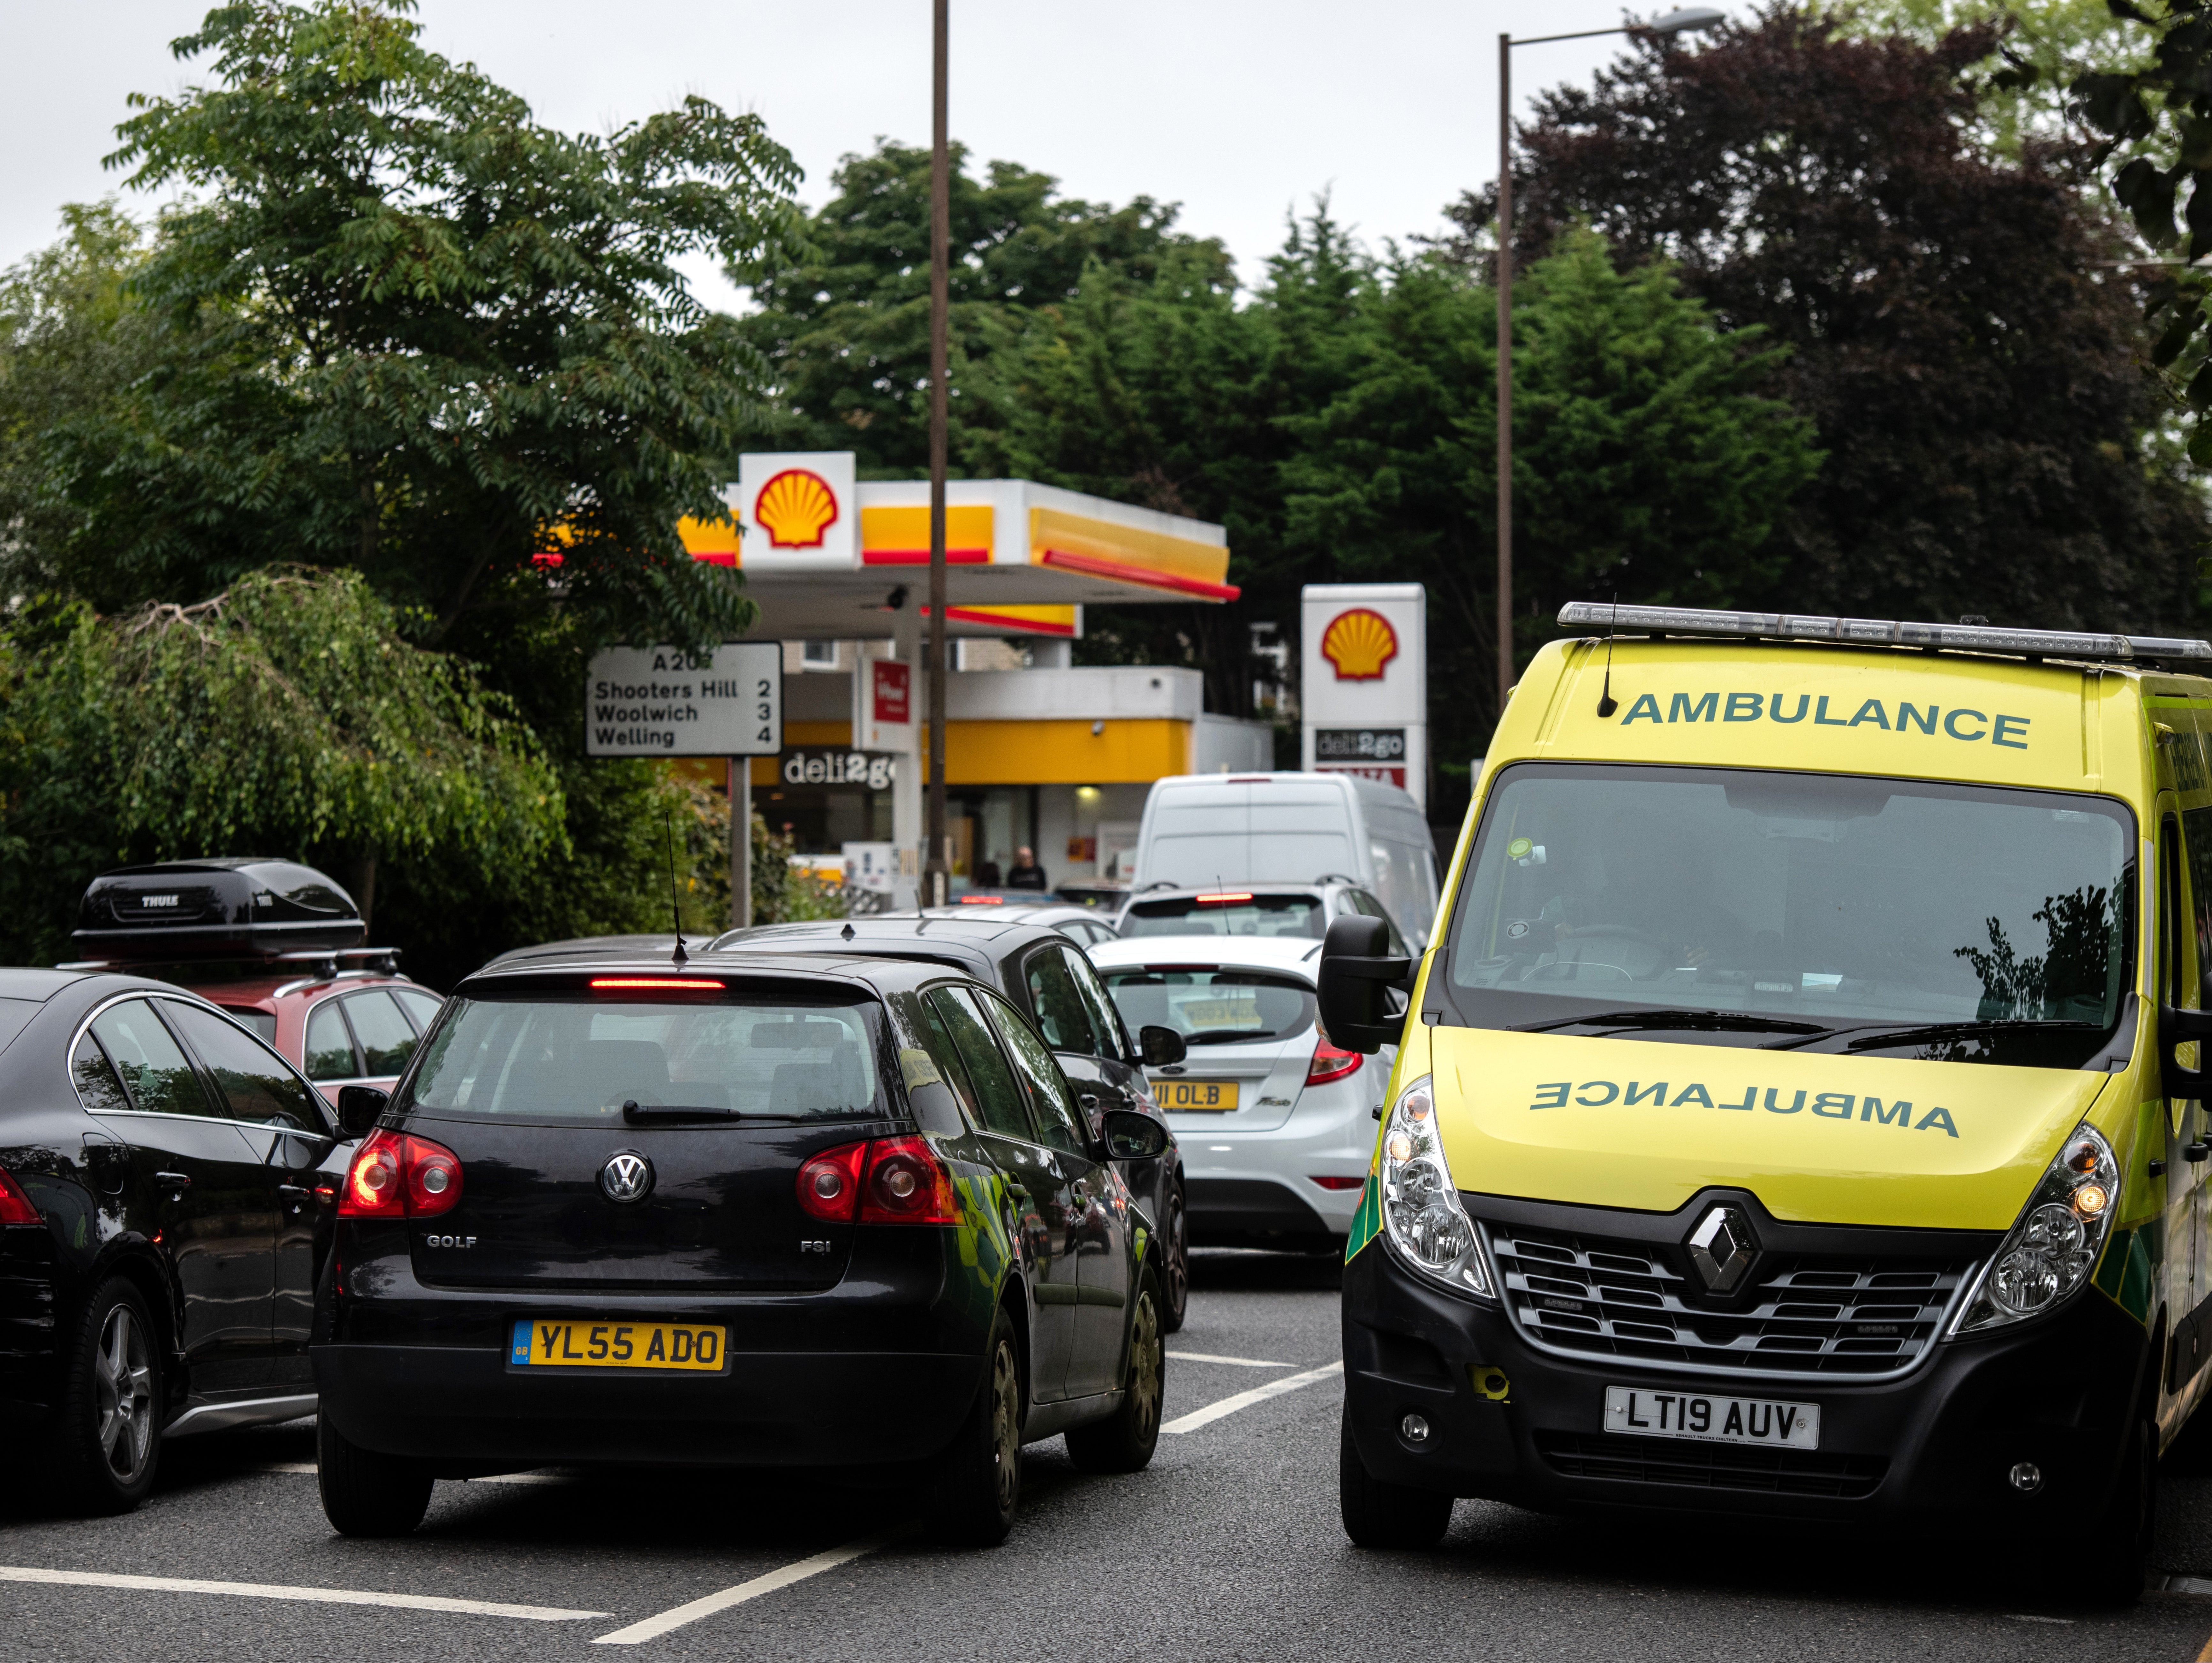 Ambulance trusts say there are no issues with fuel supplies